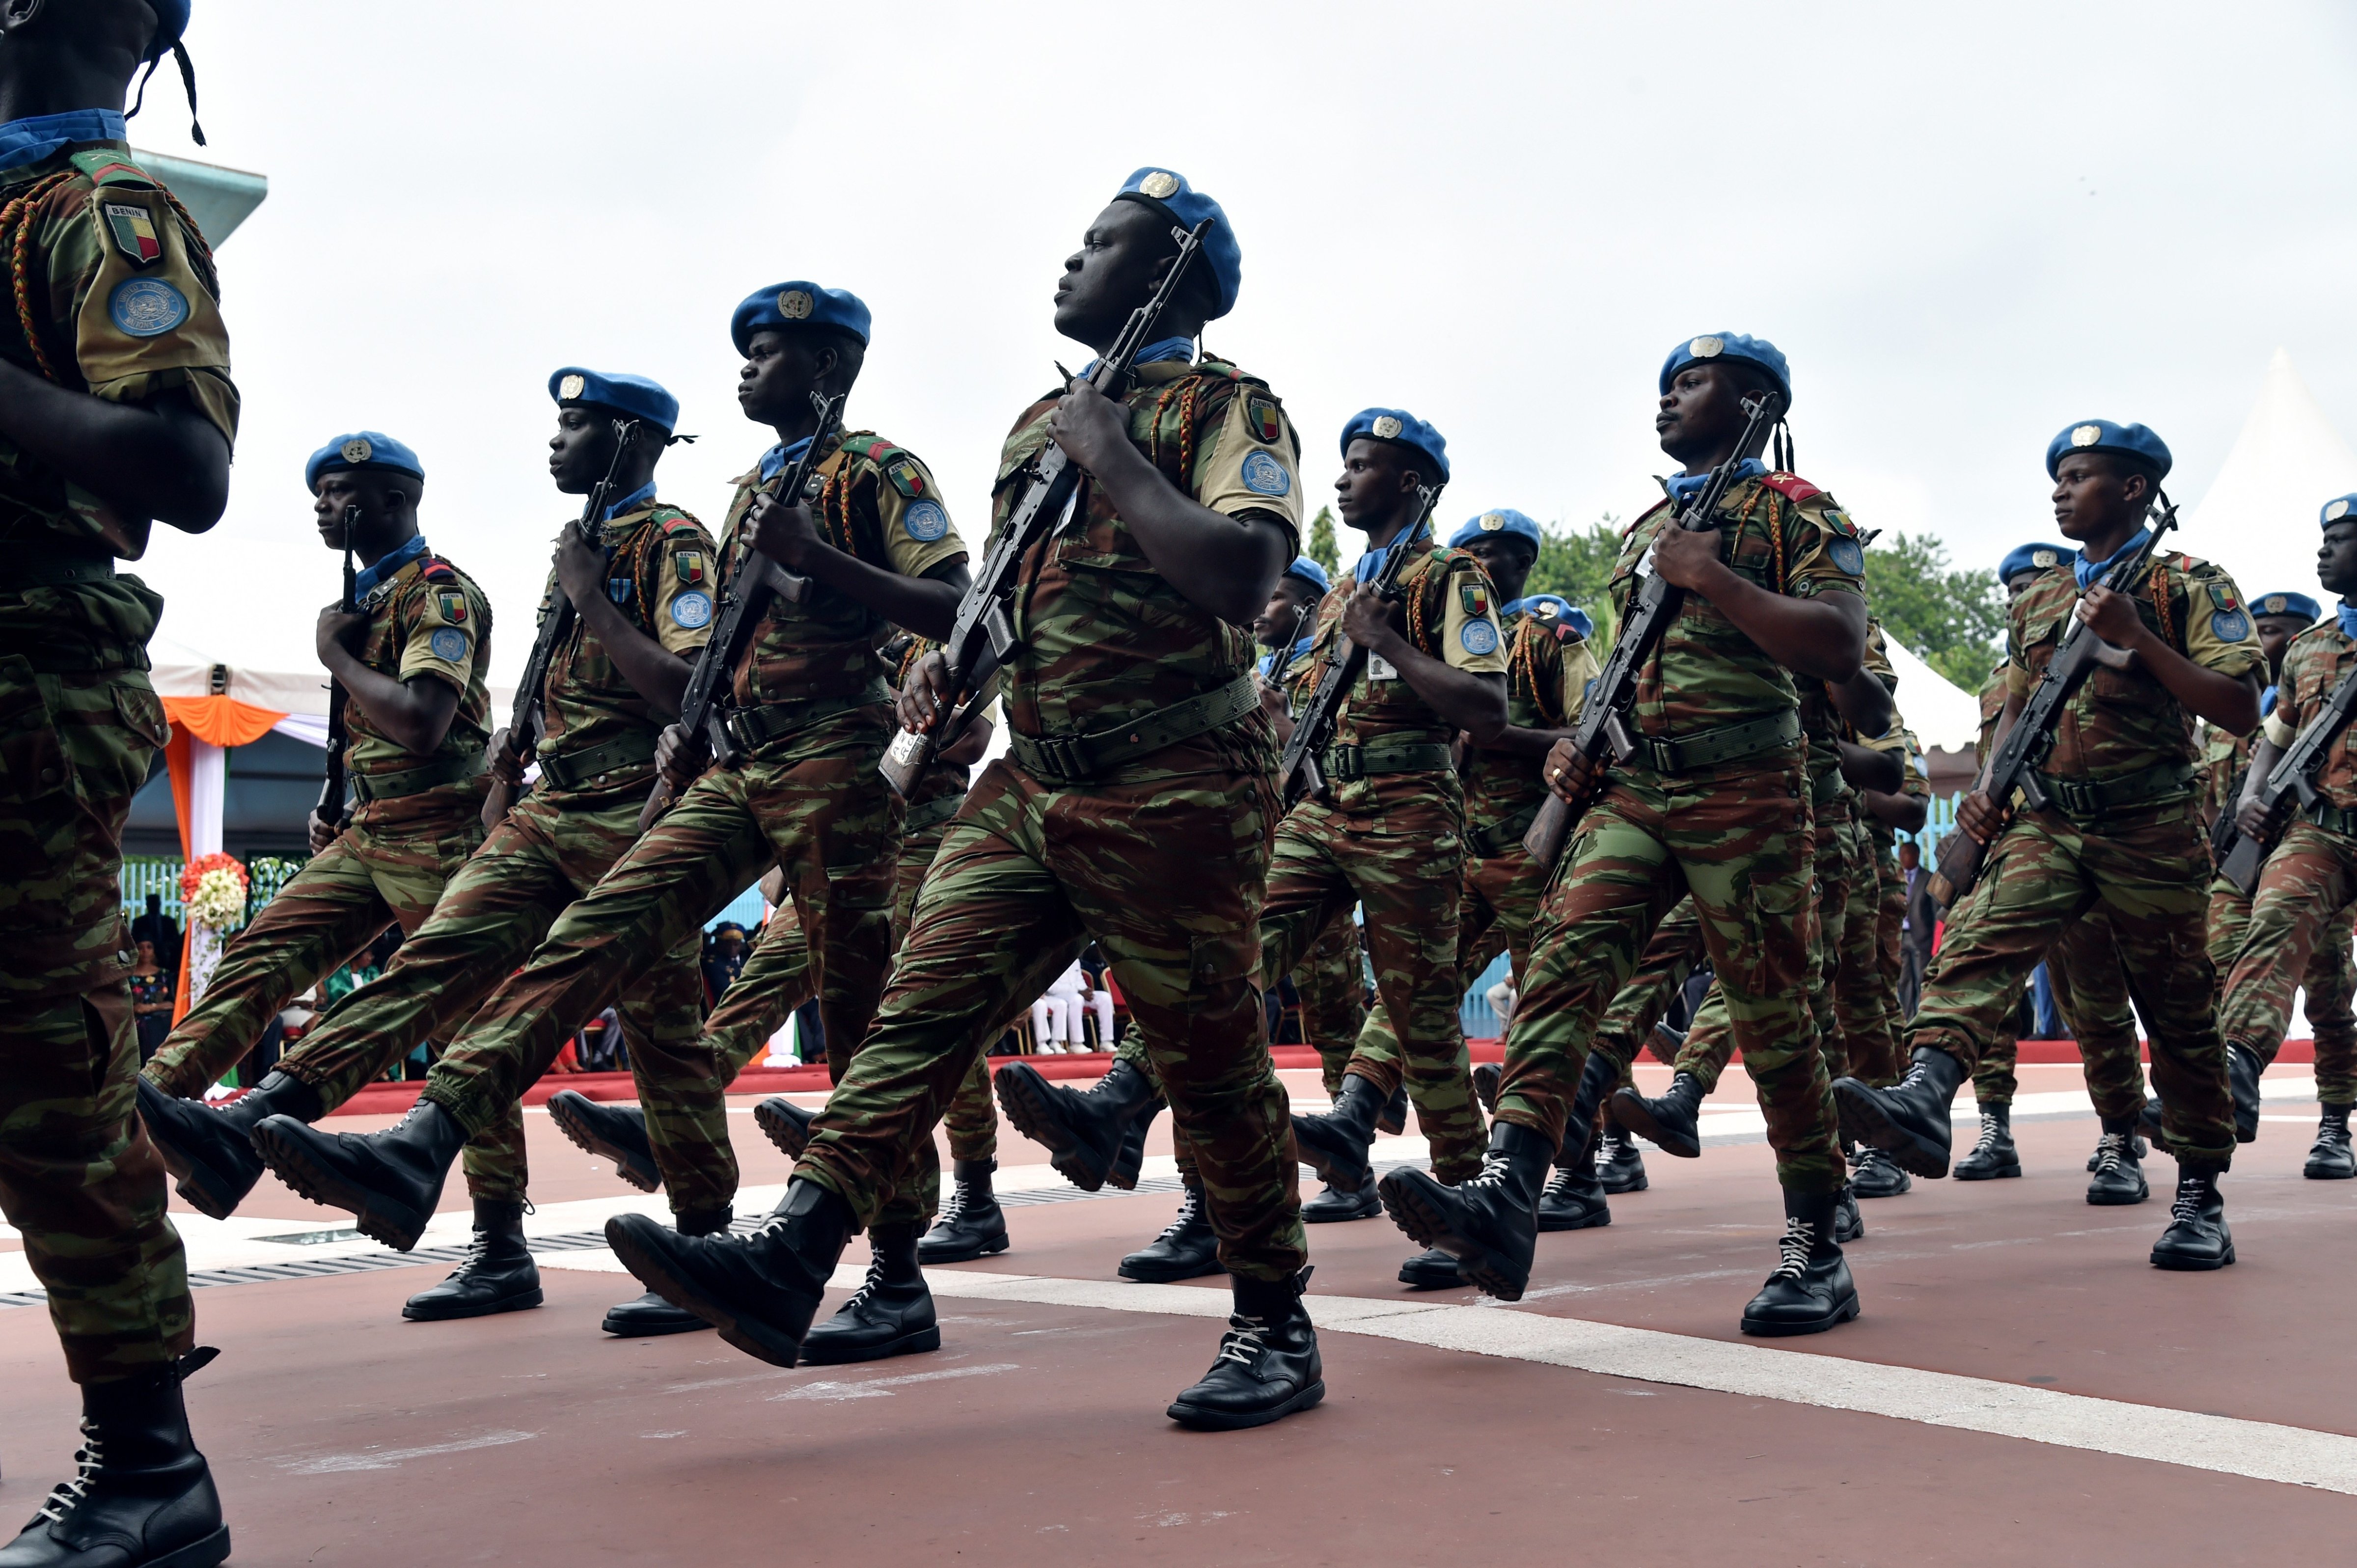 U.N. peacekeepers  parade during celebrations marking Ivory Coast's 55th anniversary of independence from France, in front of the presidential palace in Abidjan, Ivory Coast, on Aug. 7, 2015 (Issouf Sanogo—AFP/Getty Images)